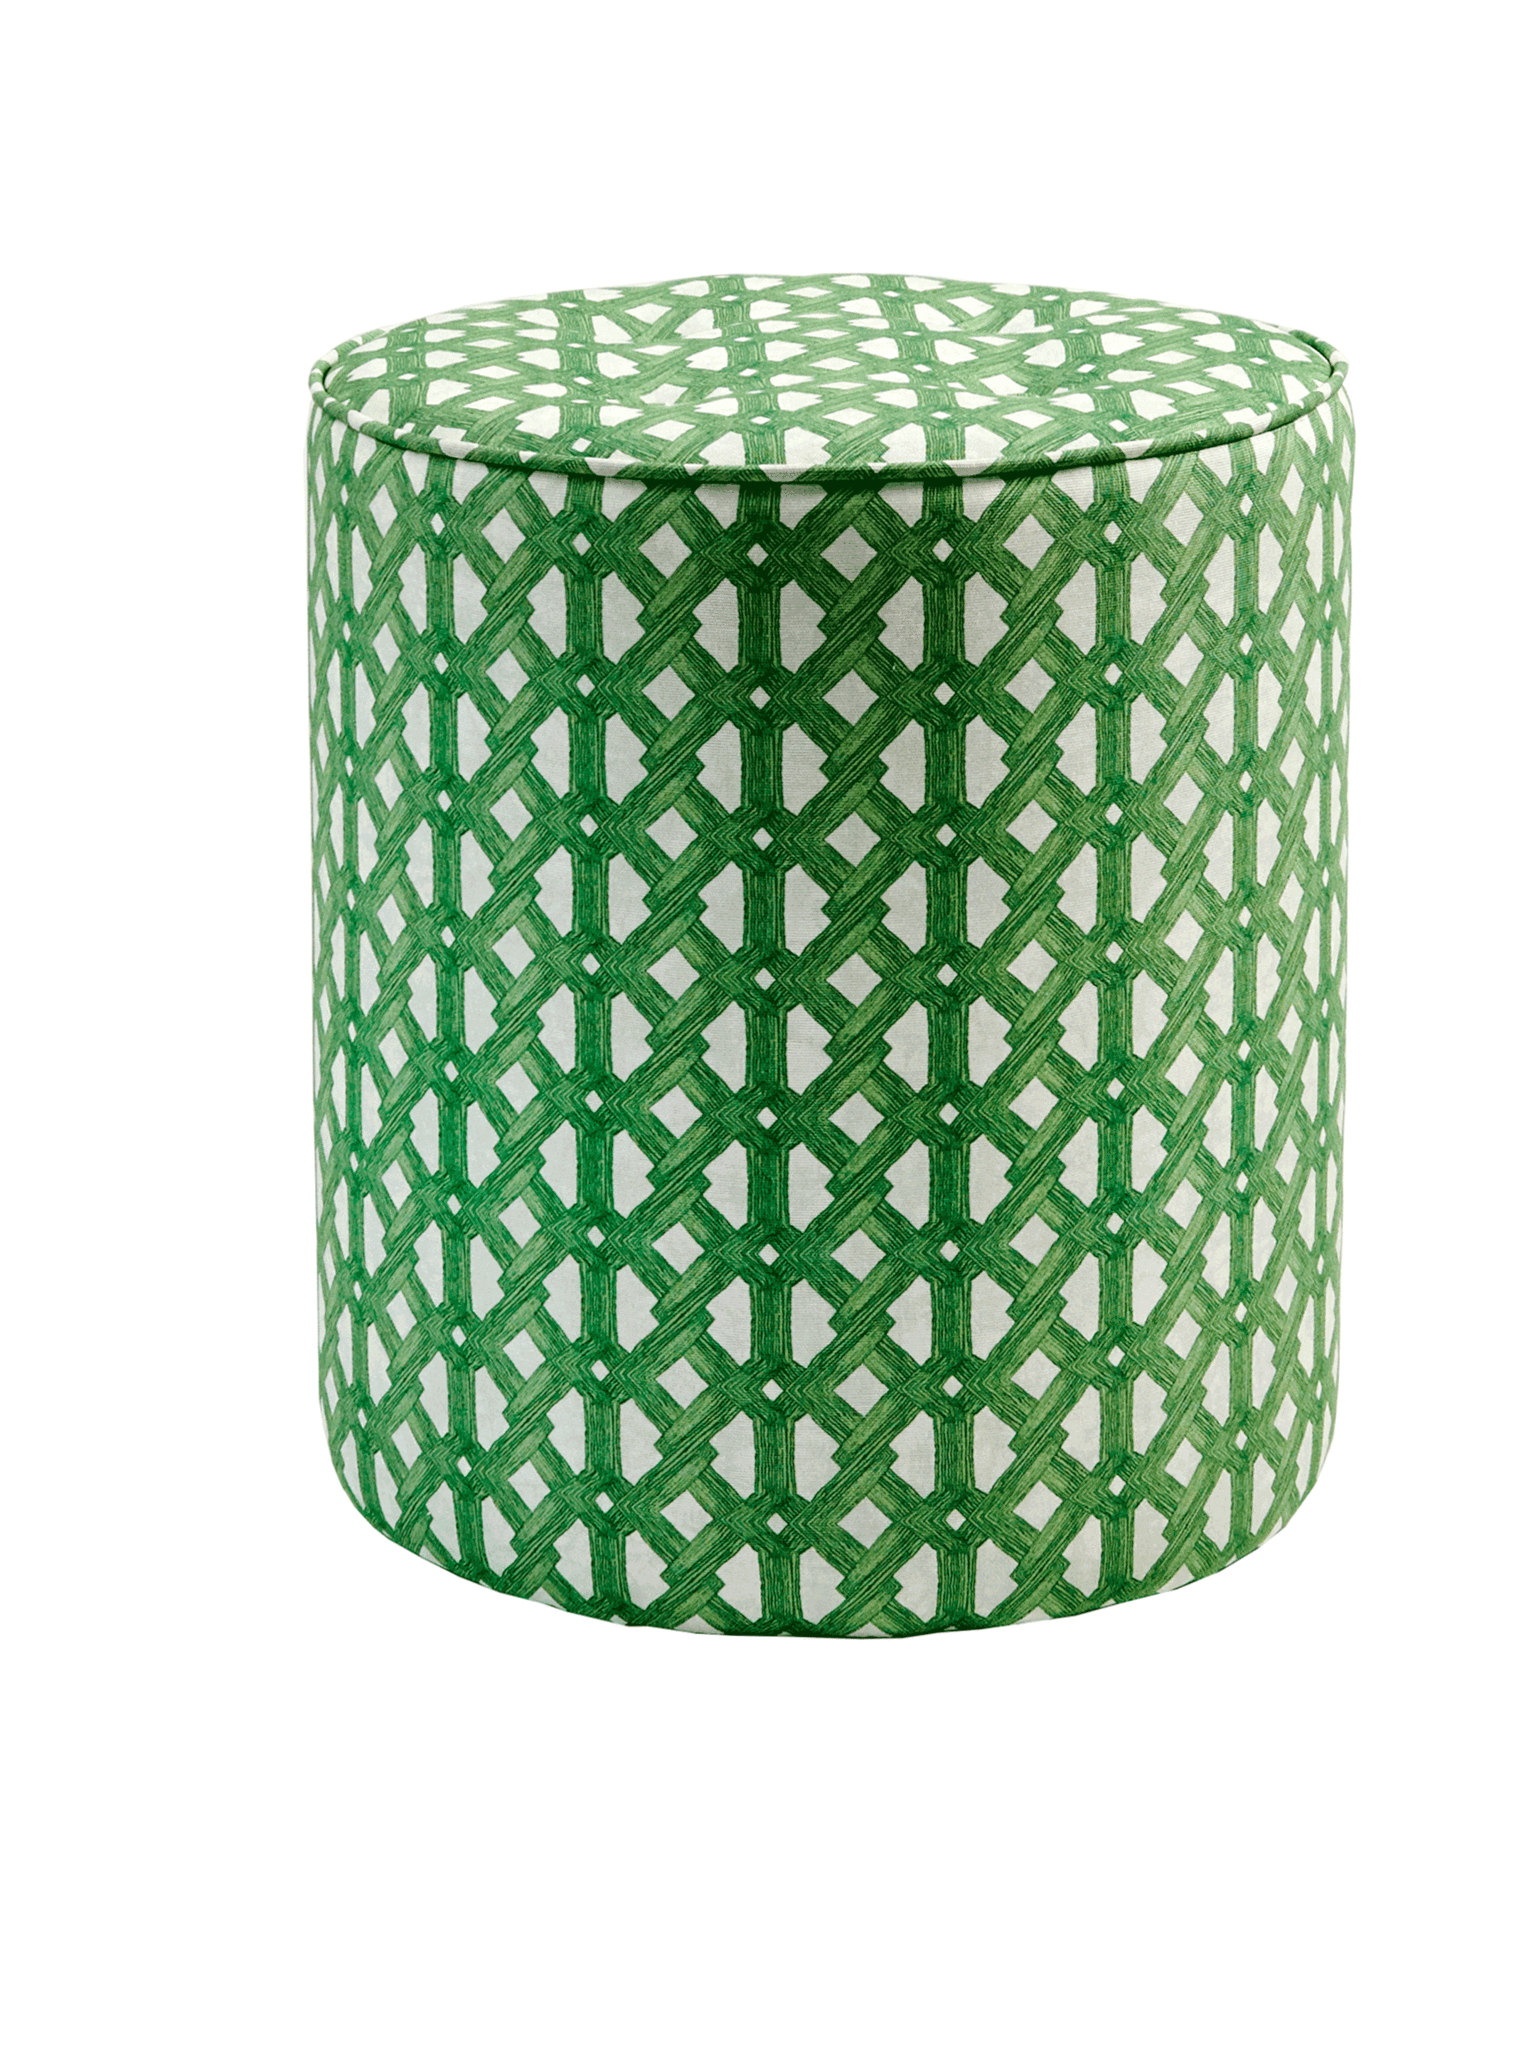 Contemporary African Pouffe with a bright green geometric pattern, inspired by mid century West African architecture. The green Aluro ottoman is handmade in England and our colourful African-inspired pouffe brings colour and an African vibe to modern interiors. Colourful  home furnishings in modern African design. Tropical modernism for contemporary interiors.